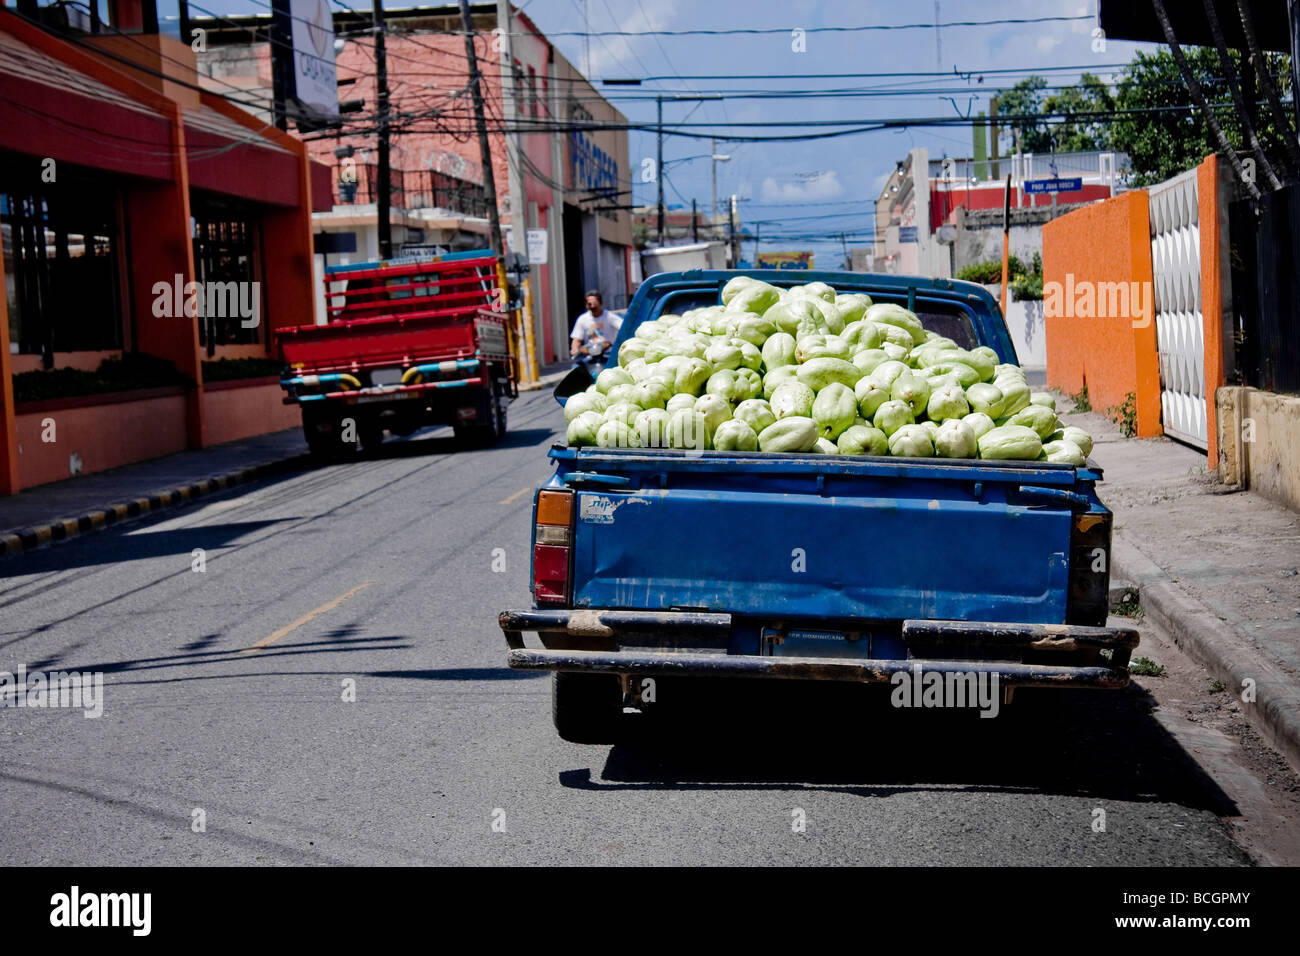 A truck piled high with a full load of Chayote aka Tayota fruit in the city of Savanna Dominican Republic Stock Photo